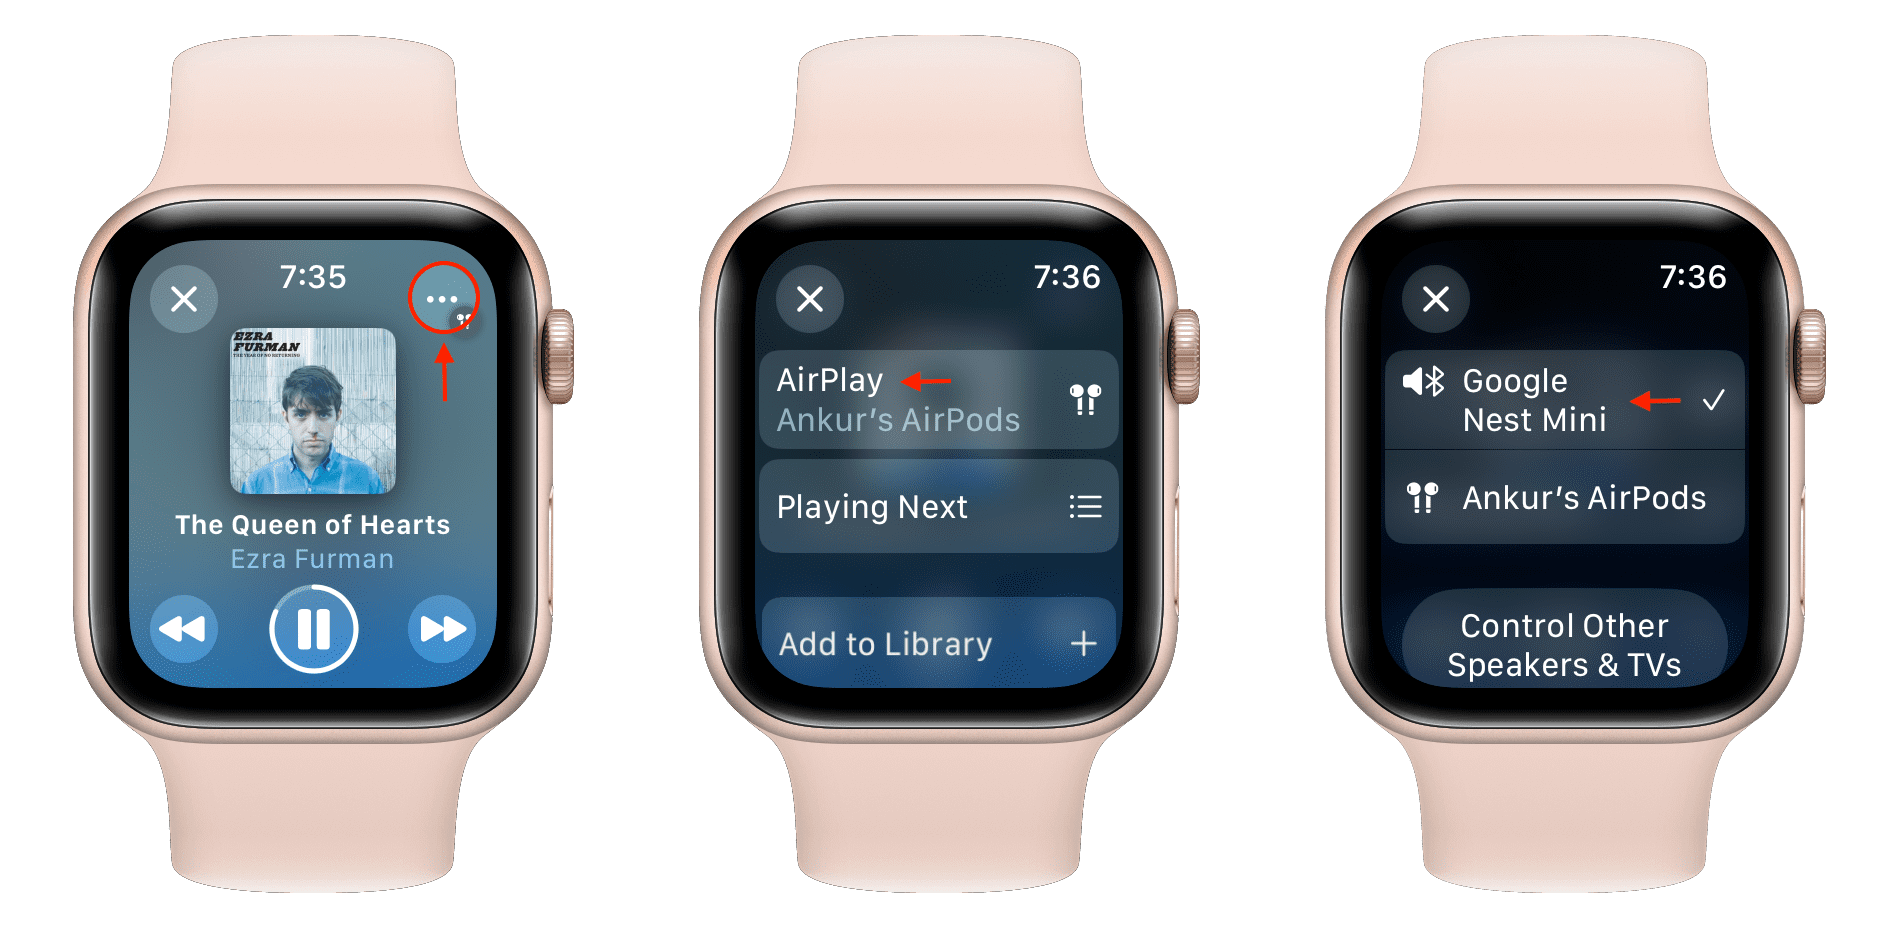 Select audio destination for Apple Watch music playback